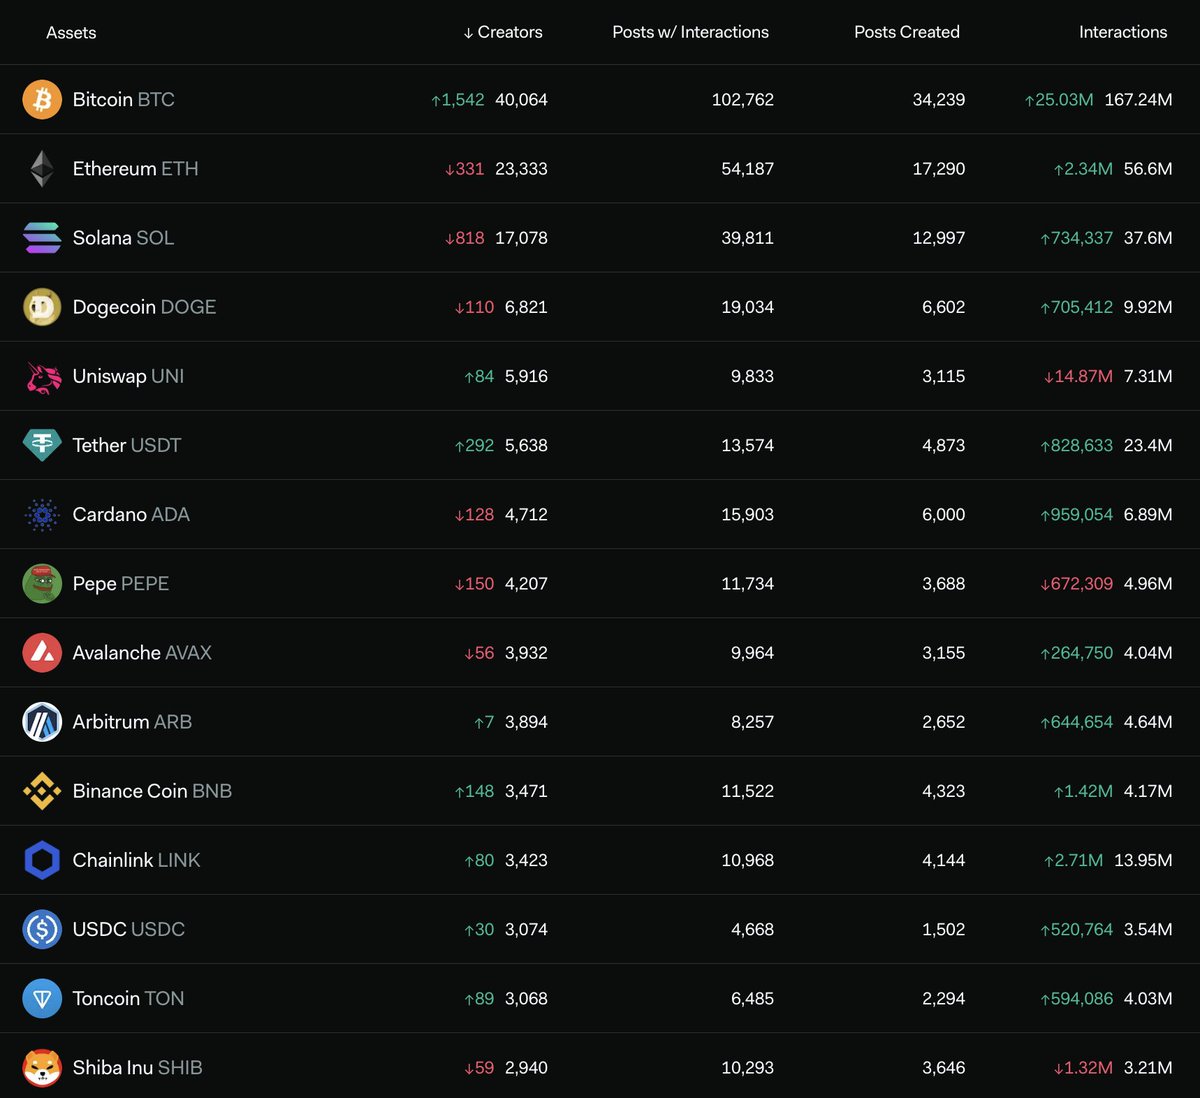 📉On down days, research is more important than ever. Which cryptocurrencies have the most active communities during times like these? Let's take a look... Bitcoin $BTC Ethereum $ETH Solana $SOL Dogecoin $DOGE Uniqswap $UNI Tether $USDT Cardano $ADA Pepe $PEPE Avalanche $AVAX…